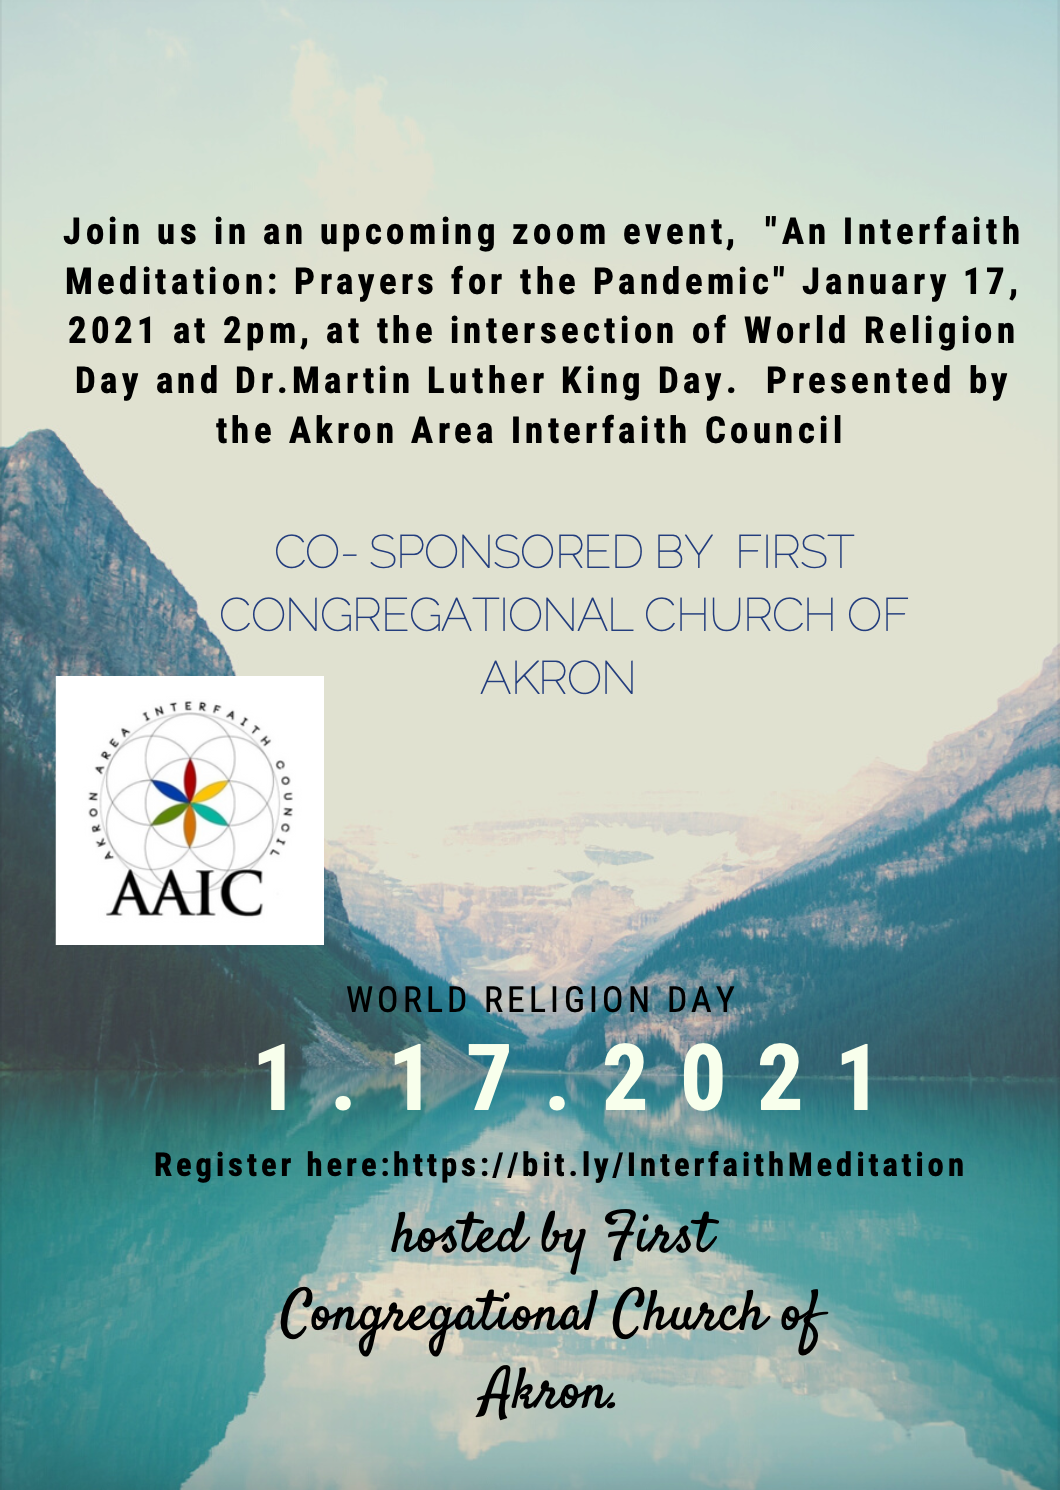 Join us for An Interfaith Meditation: Prayers for the Pandemic